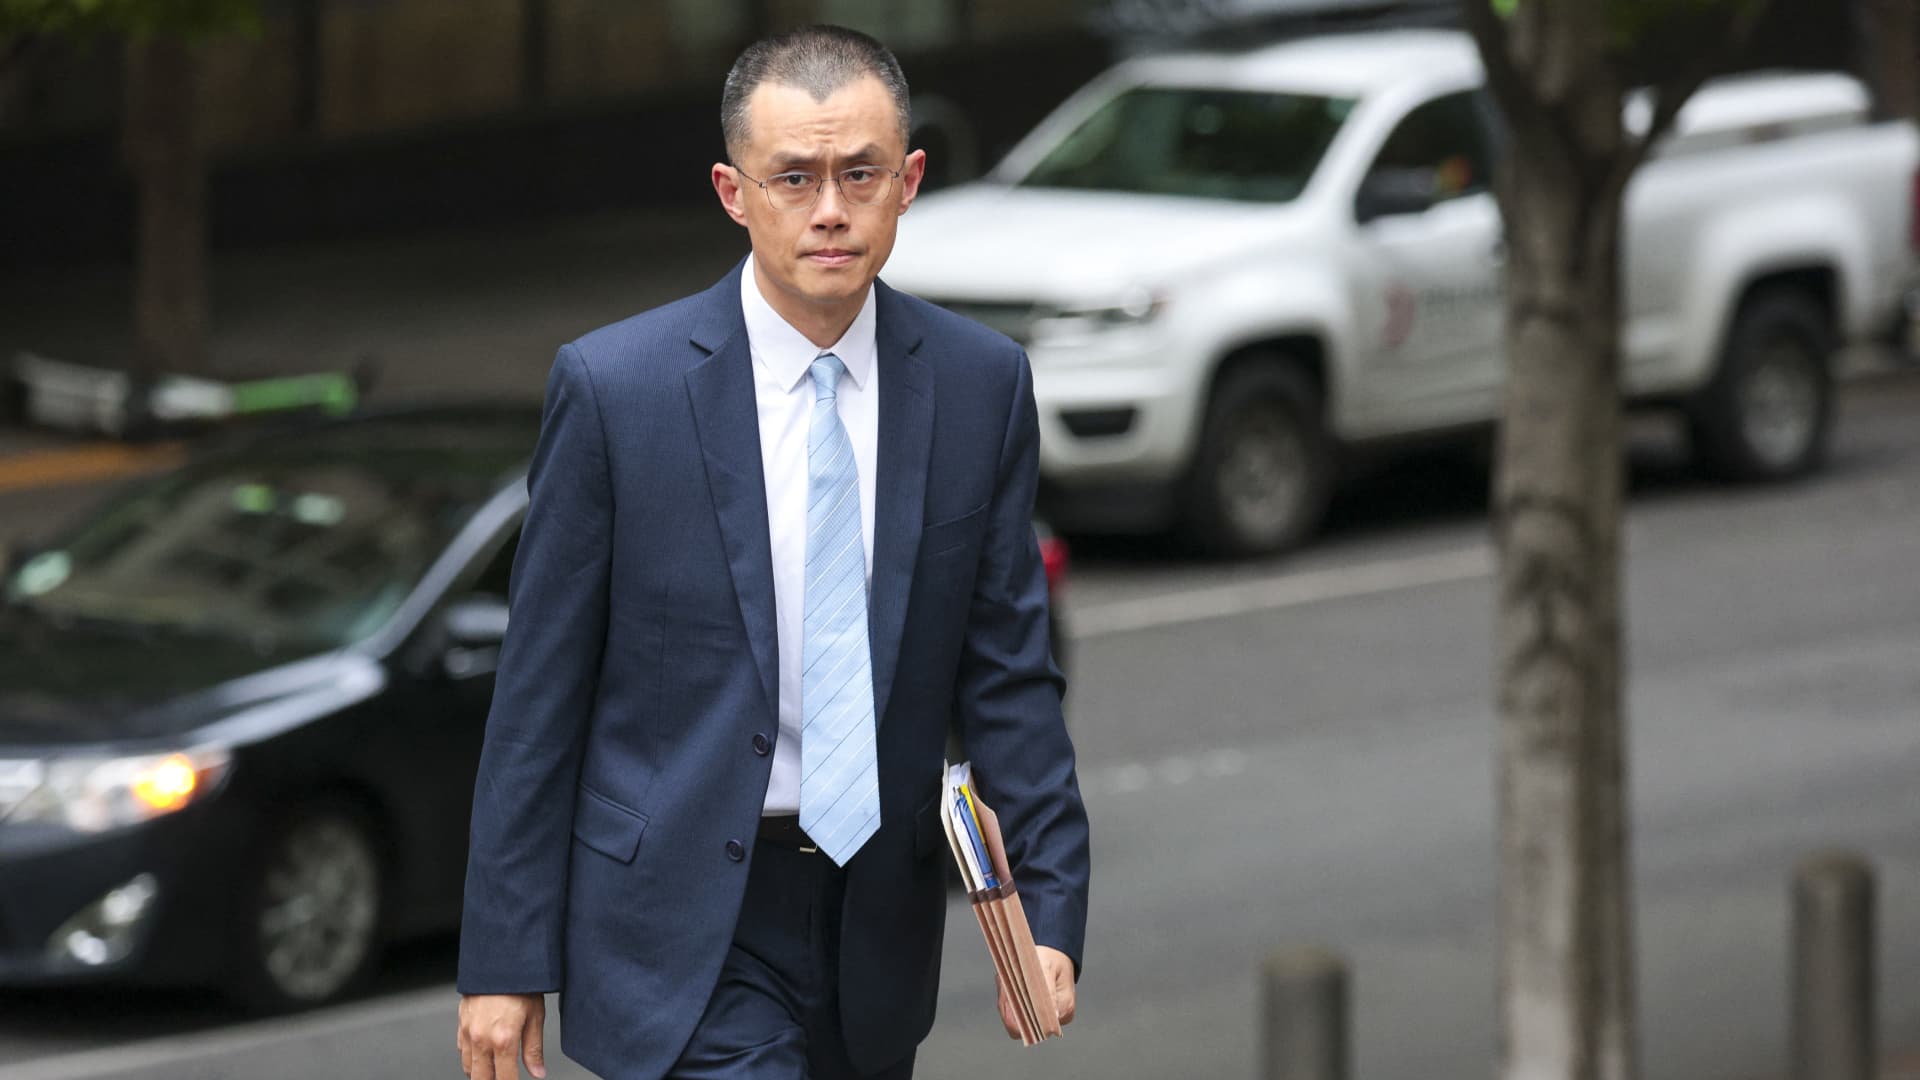 Binance founder Changpeng Zhao sentenced to 4 months in prison after plea deal